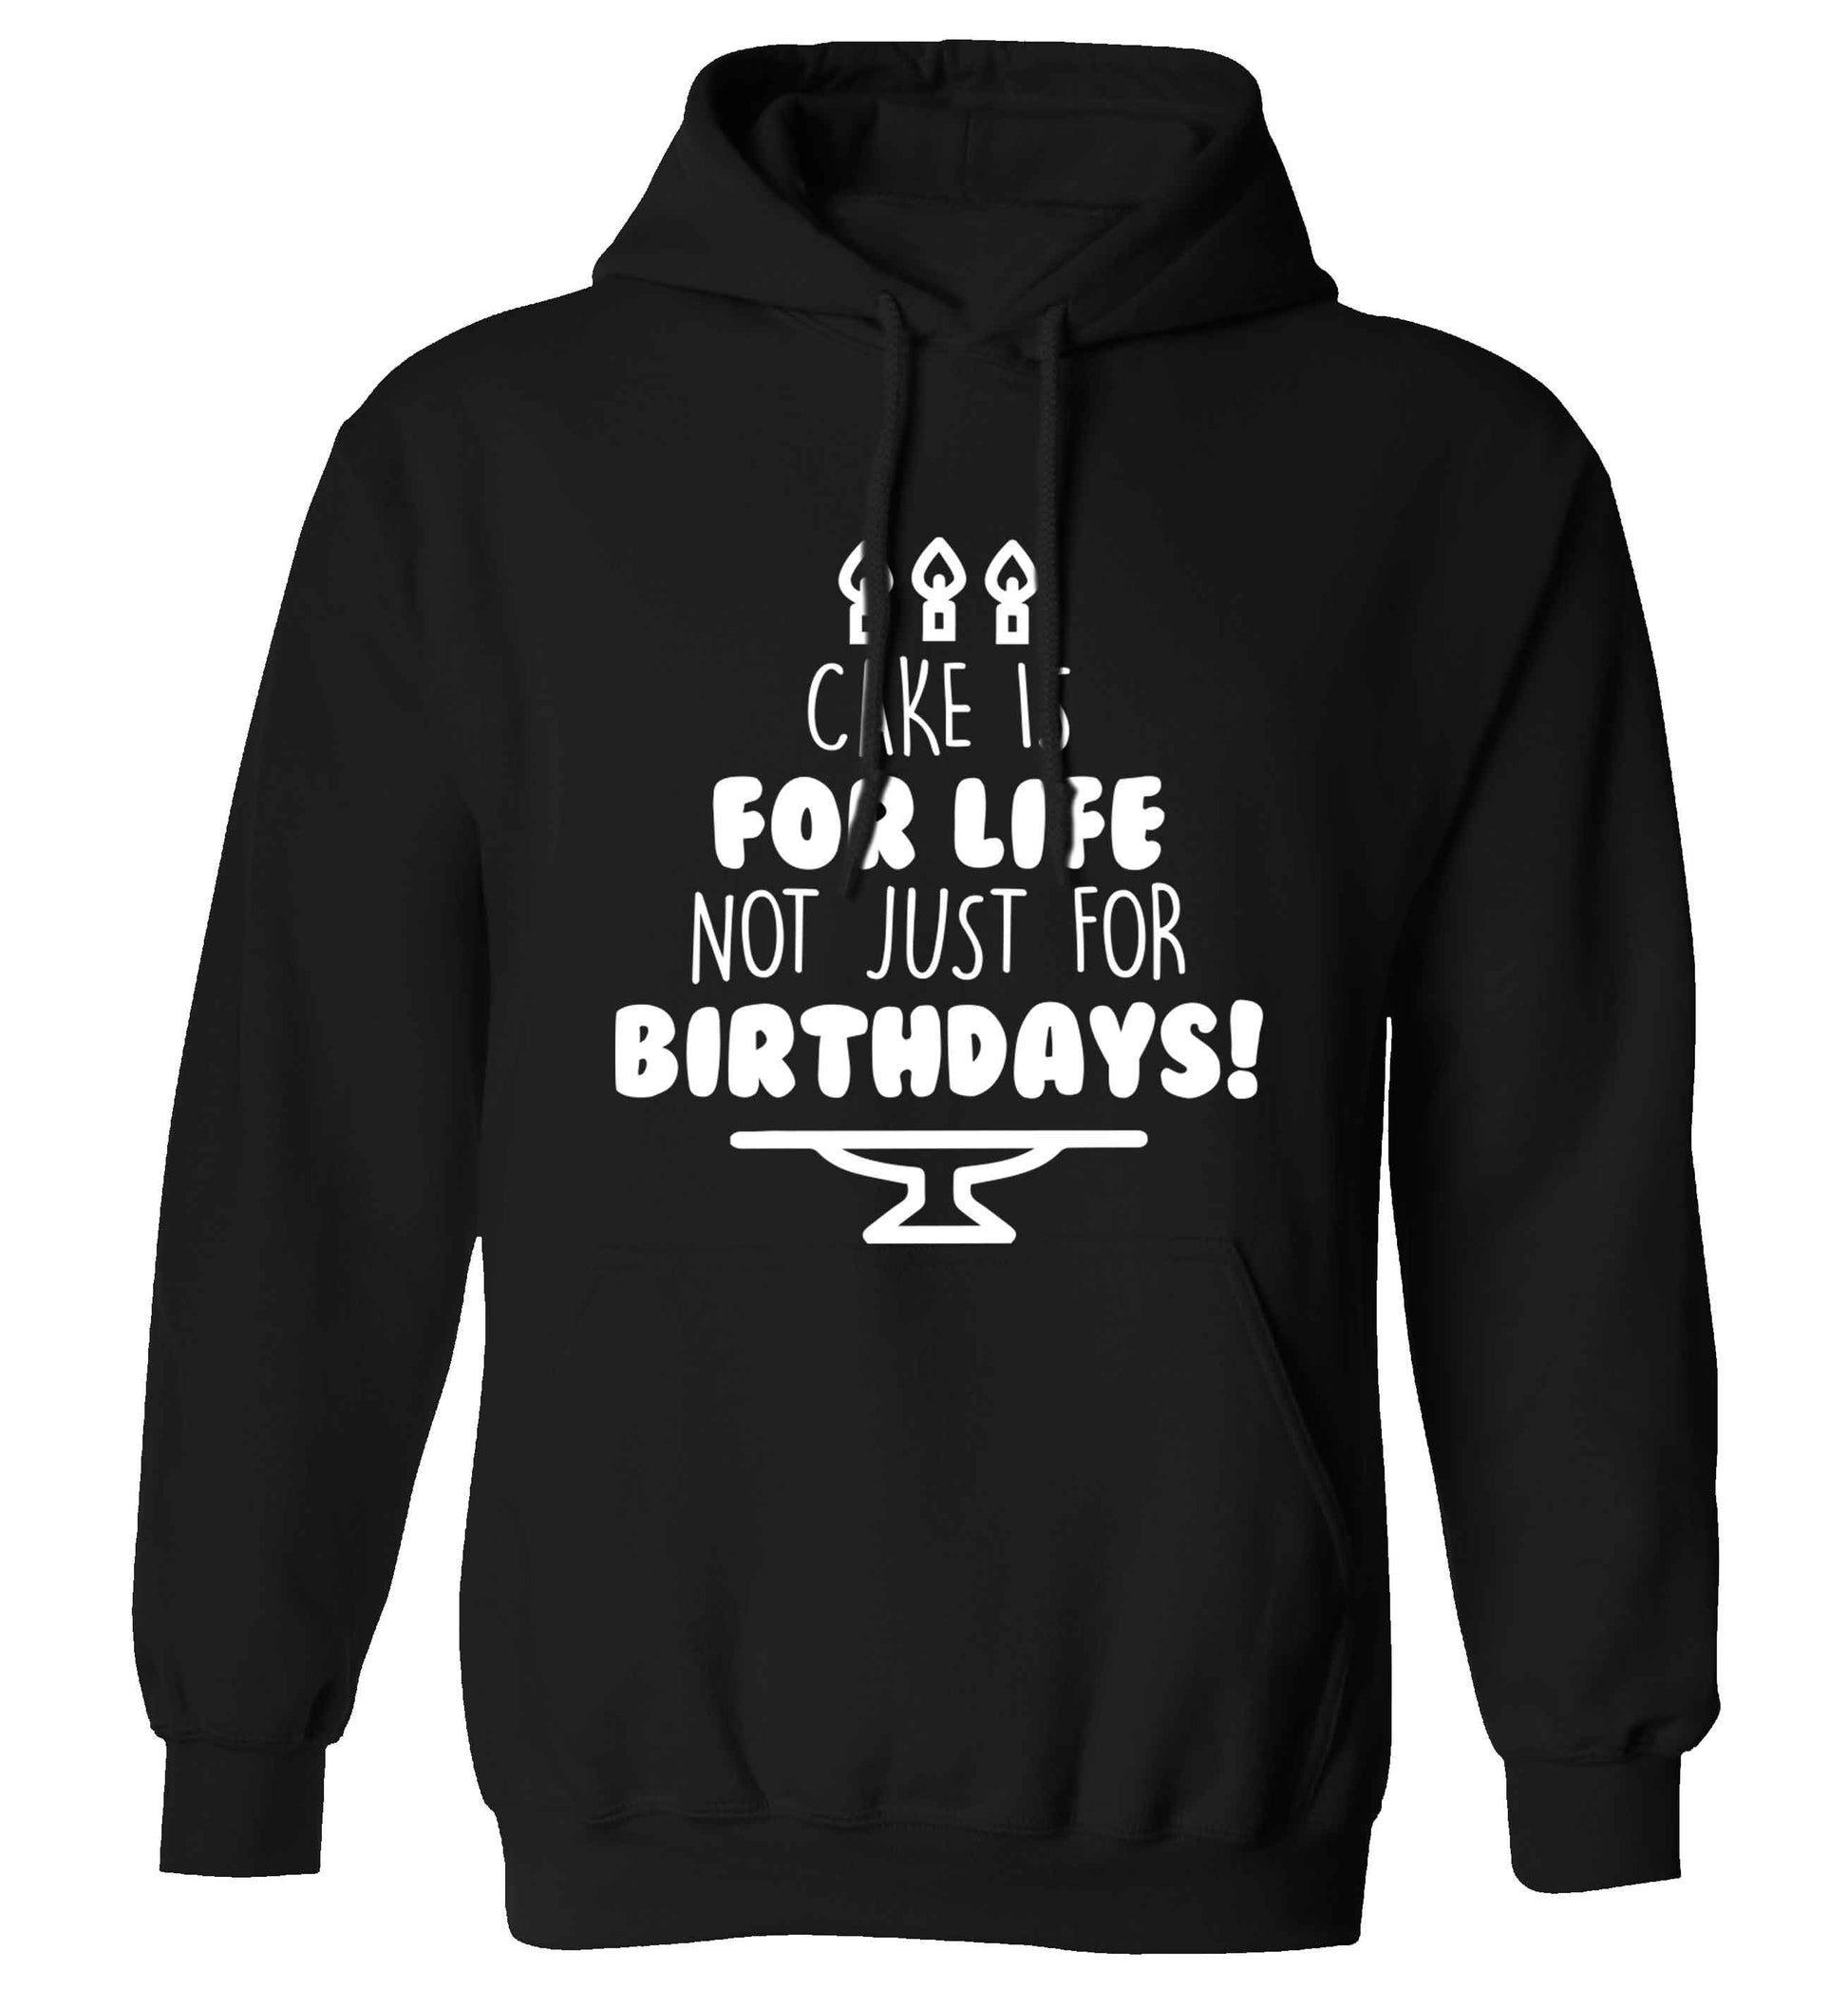 Cake is for life not just for birthdays adults unisex black hoodie 2XL